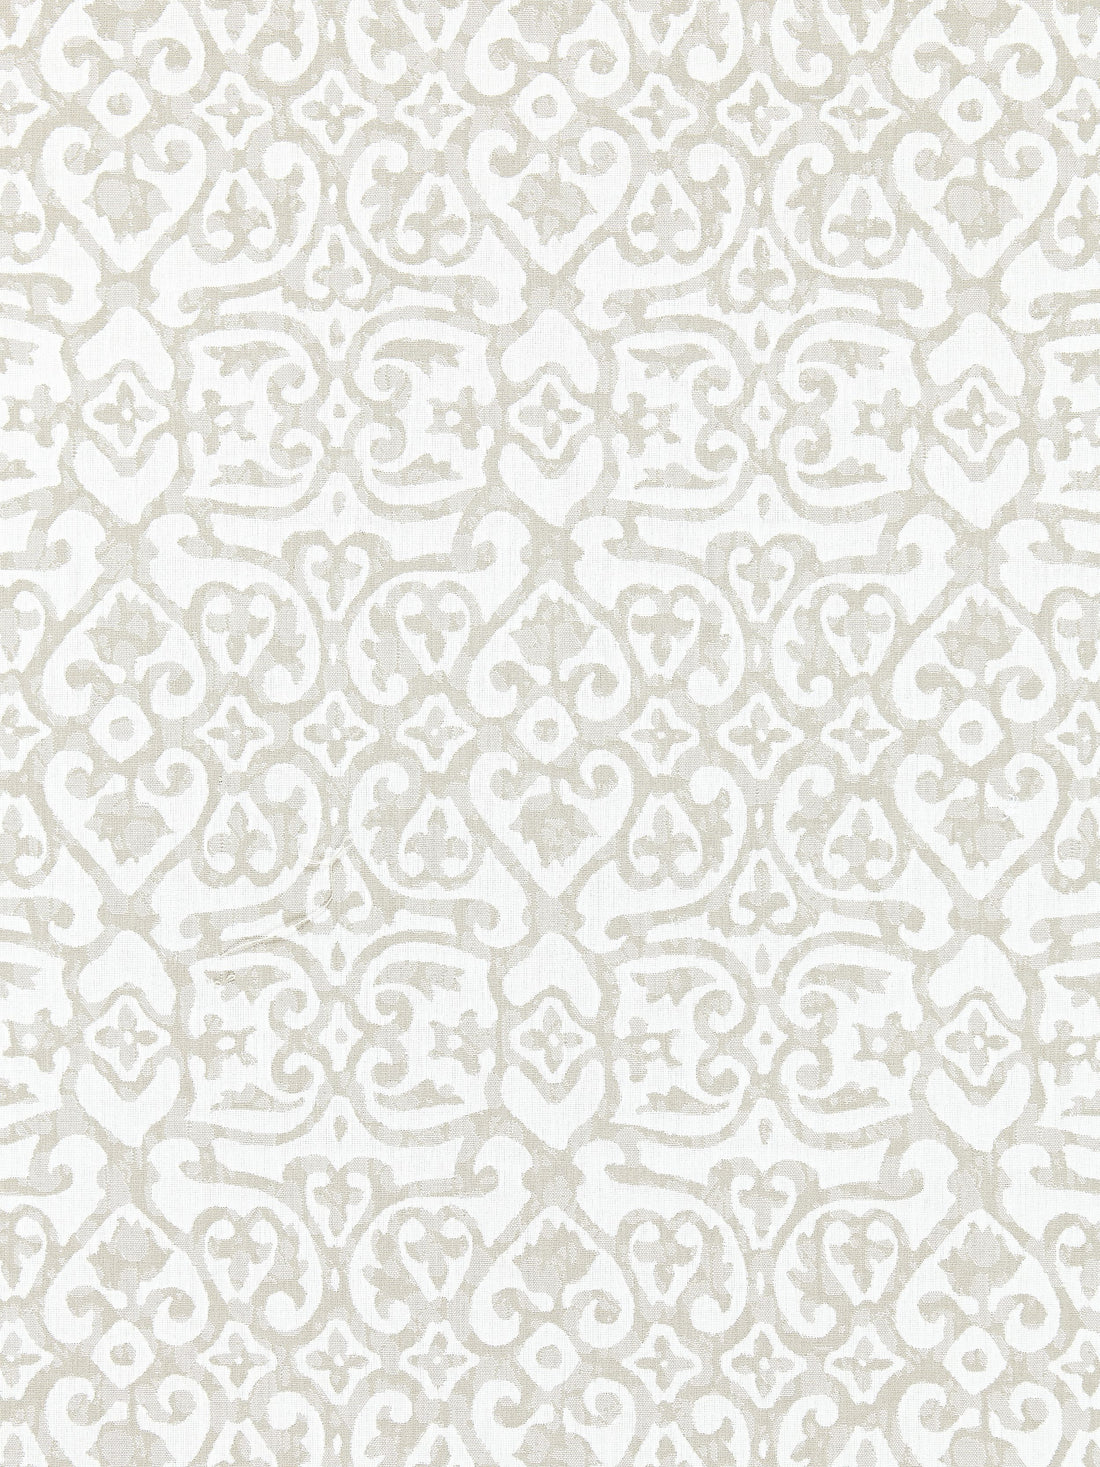 Kediri fabric in sand color - pattern number SC 000127057 - by Scalamandre in the Scalamandre Fabrics Book 1 collection